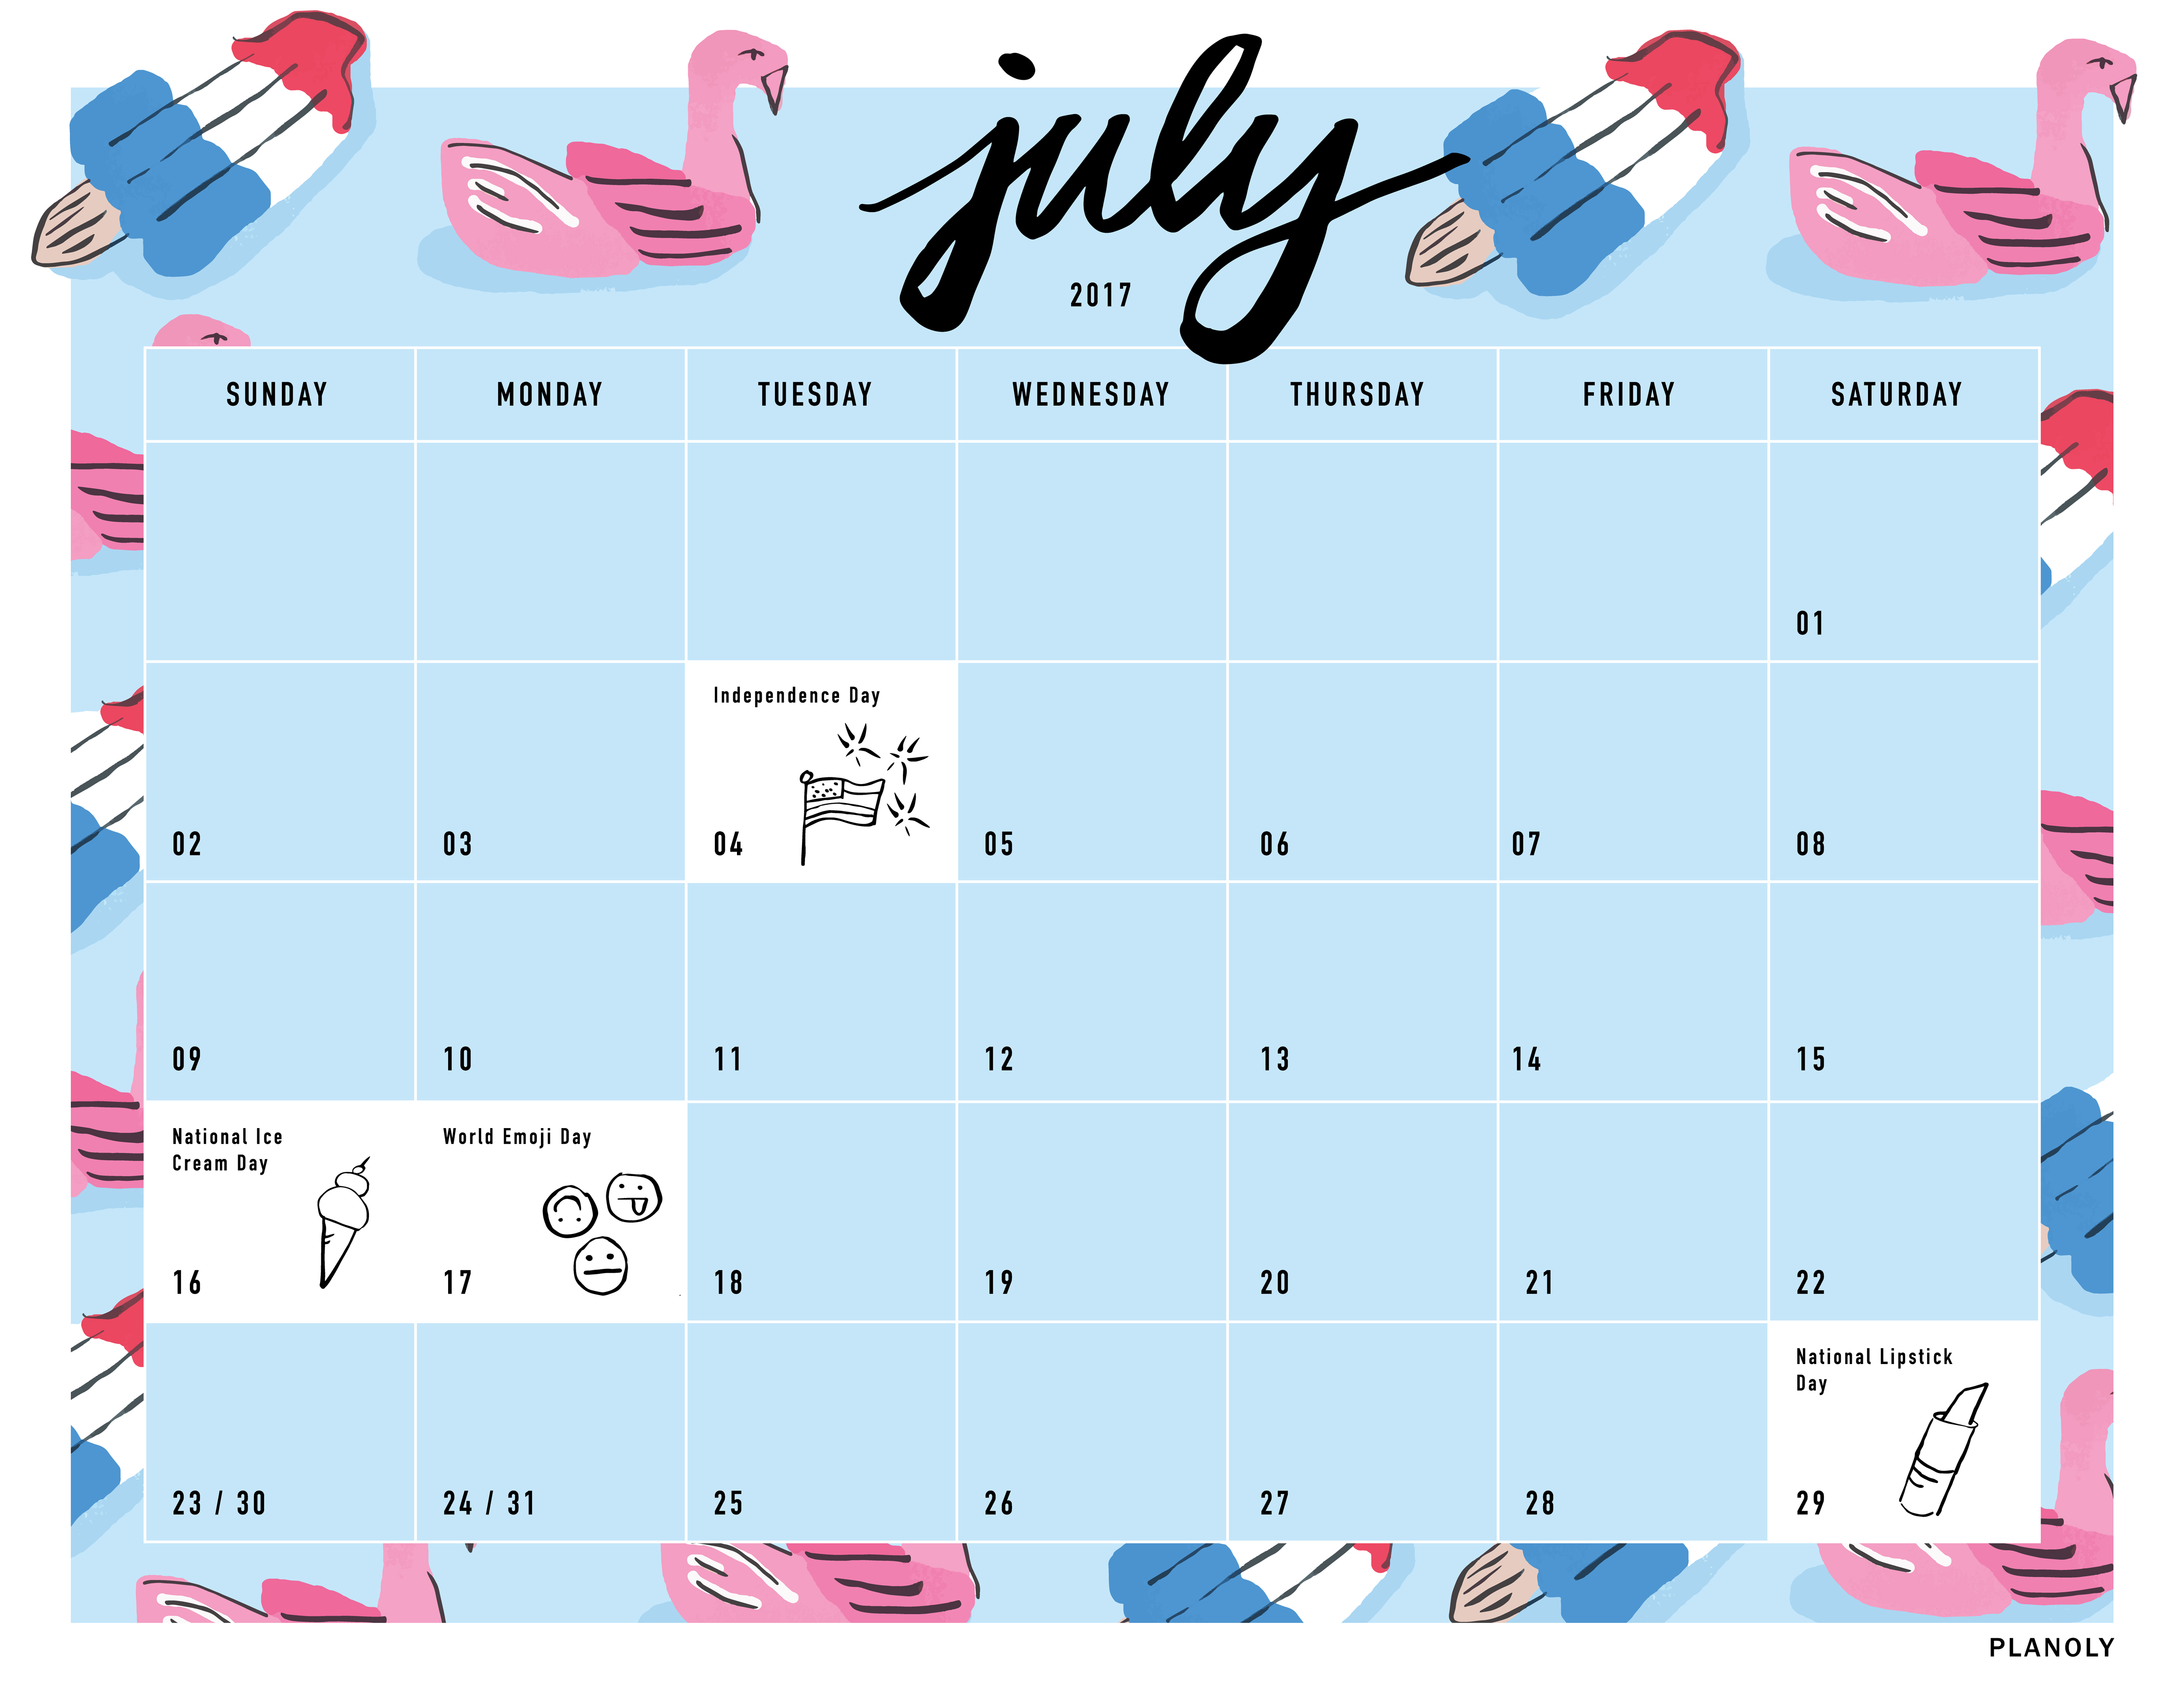 🔥 Download July Calendar Wallpaper Image In Collection by srobbins7